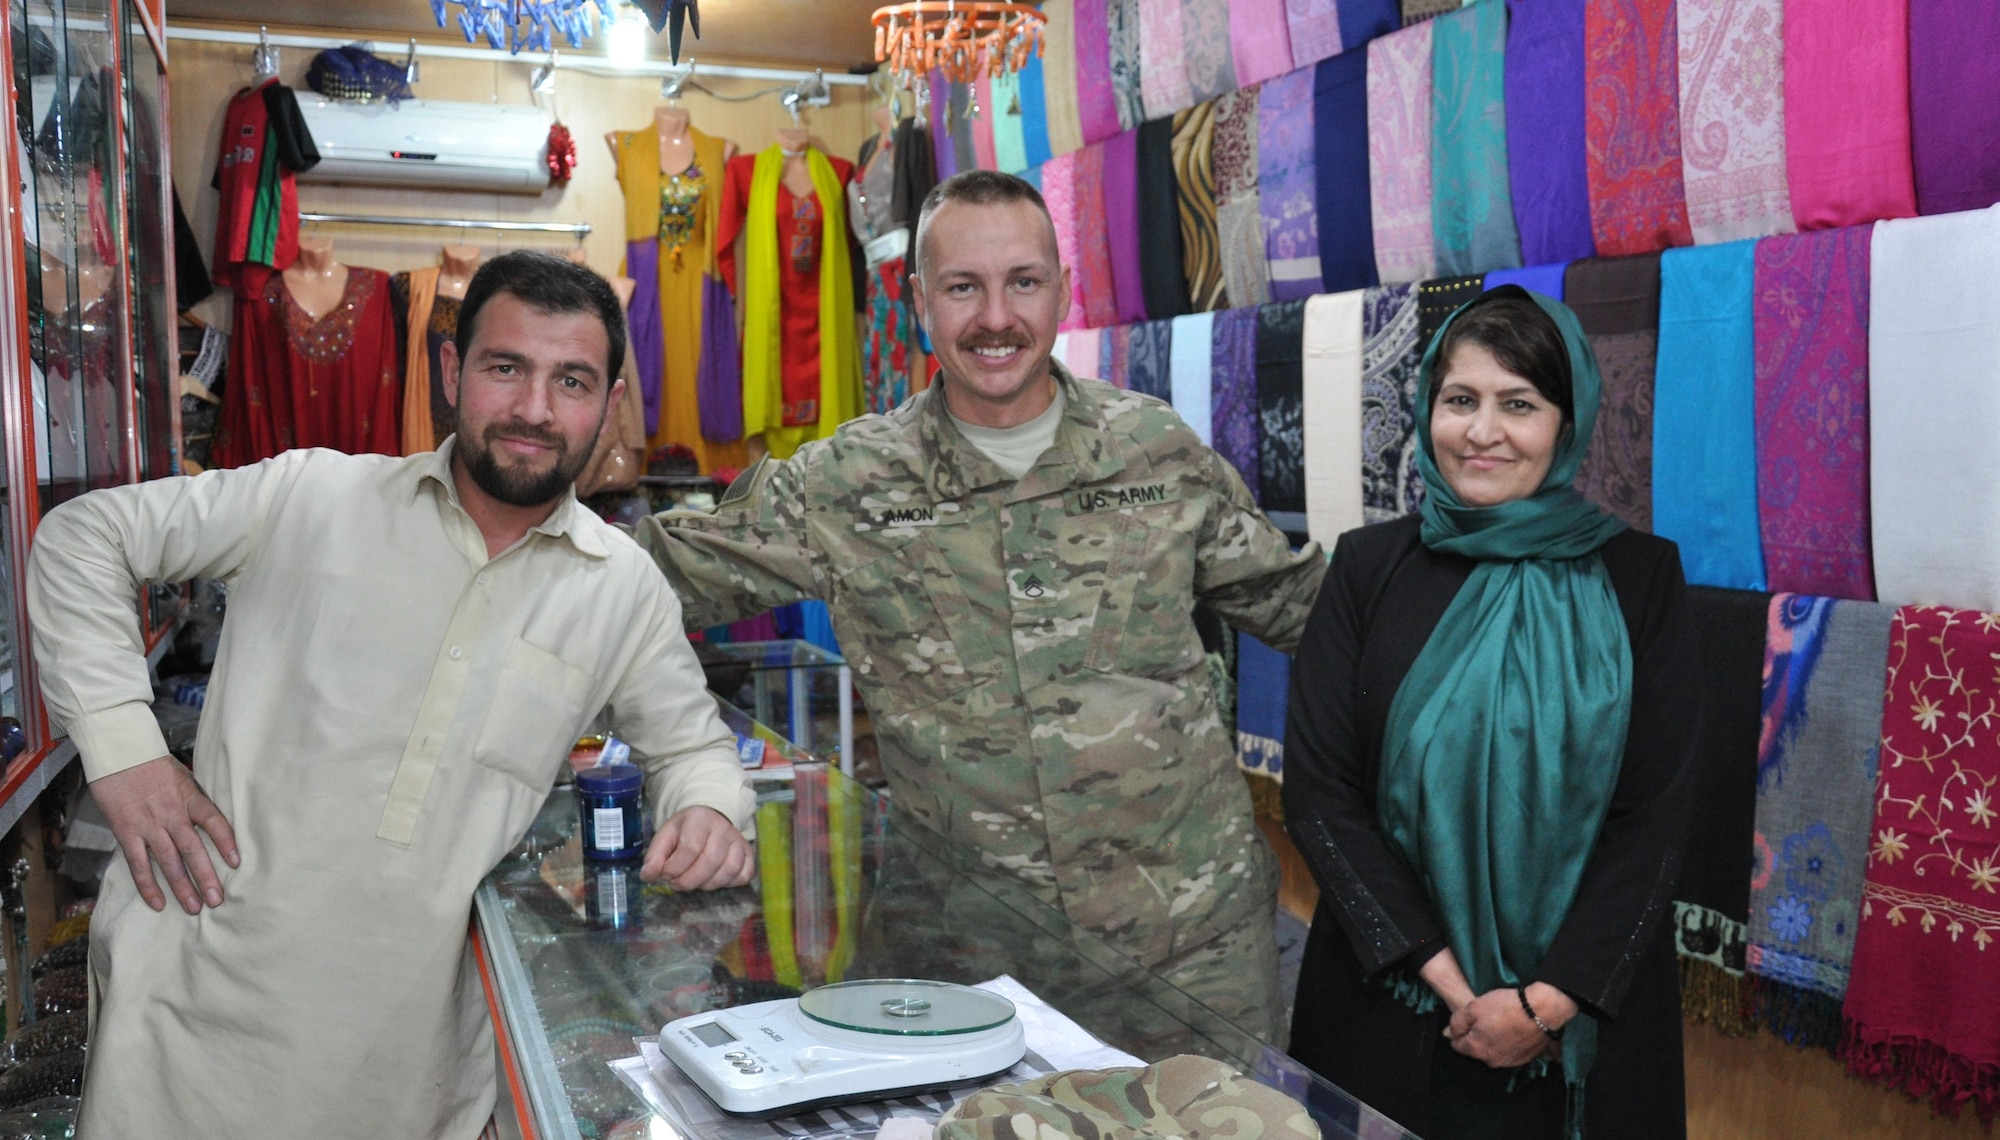 U.S. Army Staff Sgt. Matthew Amon and project managers of a local orphanage in Kabul, Afghanistan, pose for a photo at a store in the base bazaar. Amon, a security forces squad leader at Train, Advise, Assist Command-Air (TAAC-Air), met the couple and helped set-up a school supply drive with family and friends back home in Texas to donate to children at a local orphanage.  Amon is deployed from the 442nd Engineer Company as part of the Texas Army National Guard.  (U.S. Air Force photo by Capt. Eydie Sakura/released)